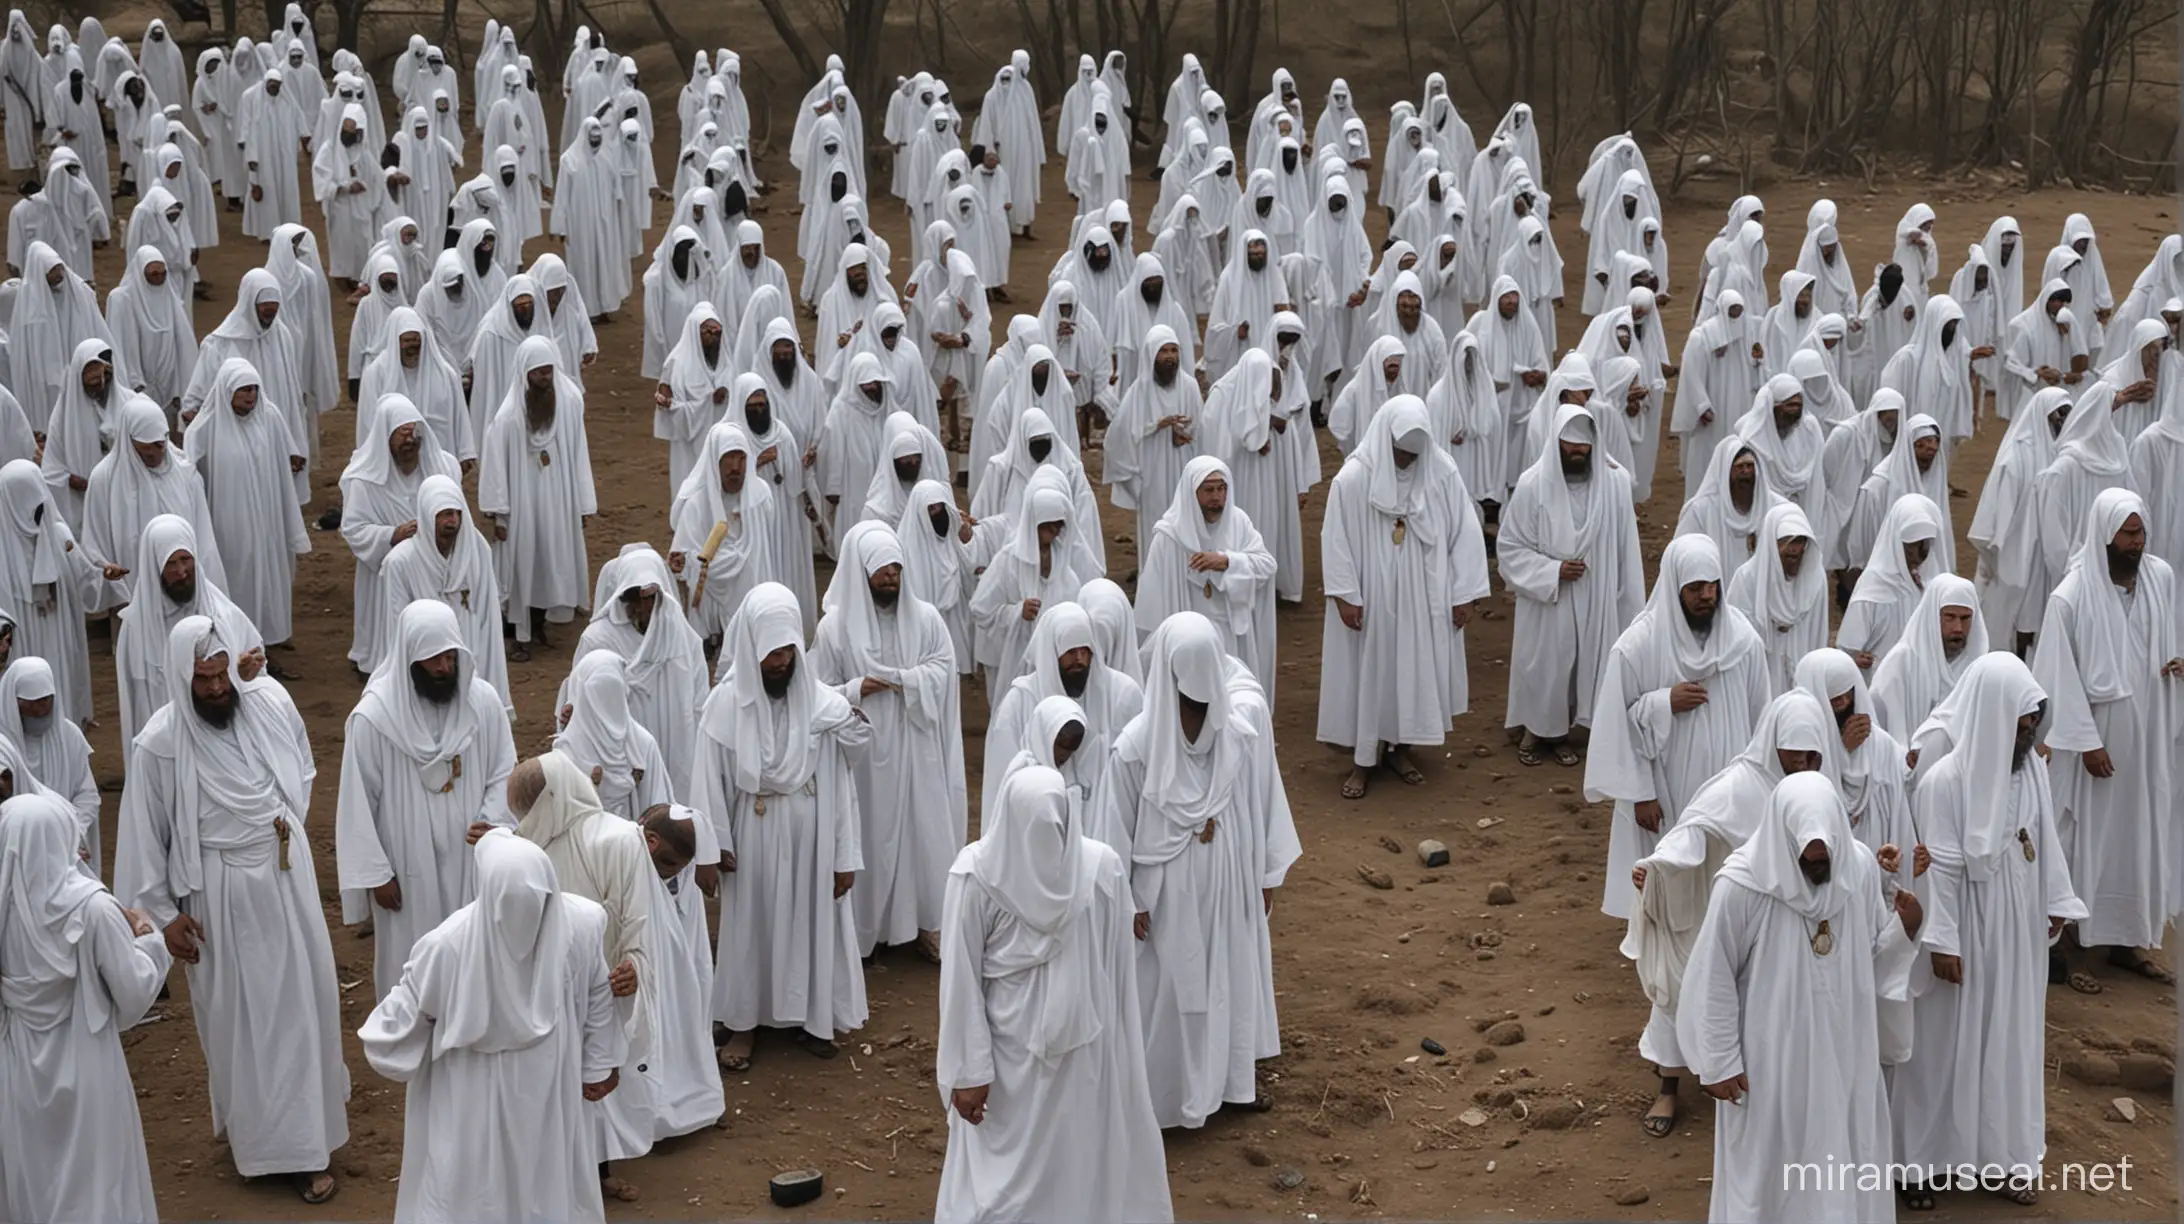 WhiteRobed Sect Followers Engage in Dark Rituals